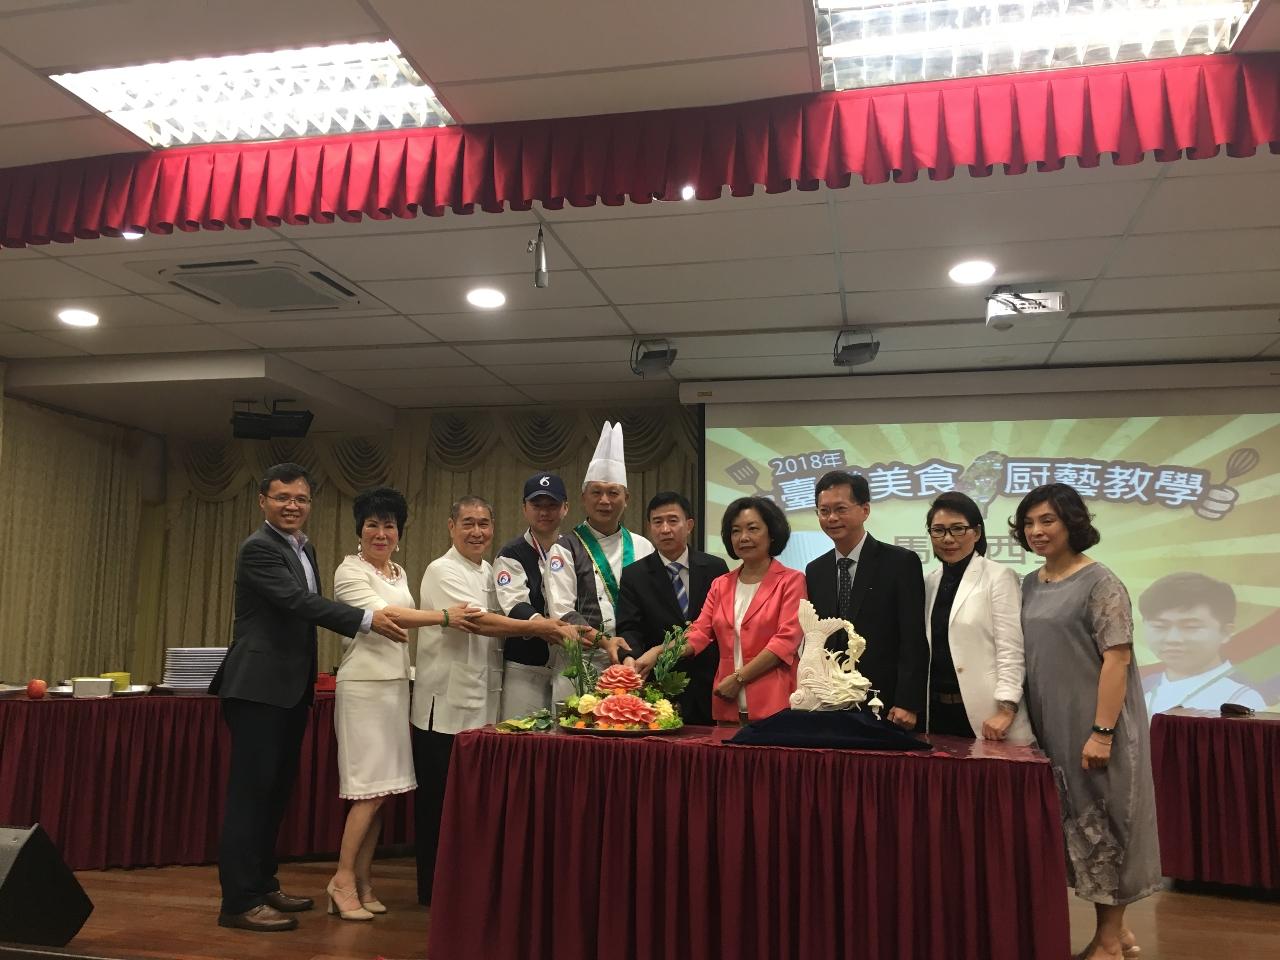 Representative Anne Hung (right four) attends Malaysia 2018 Tour of Taiwan Gourmet Cuisines Opening Ceremony with all VIP.